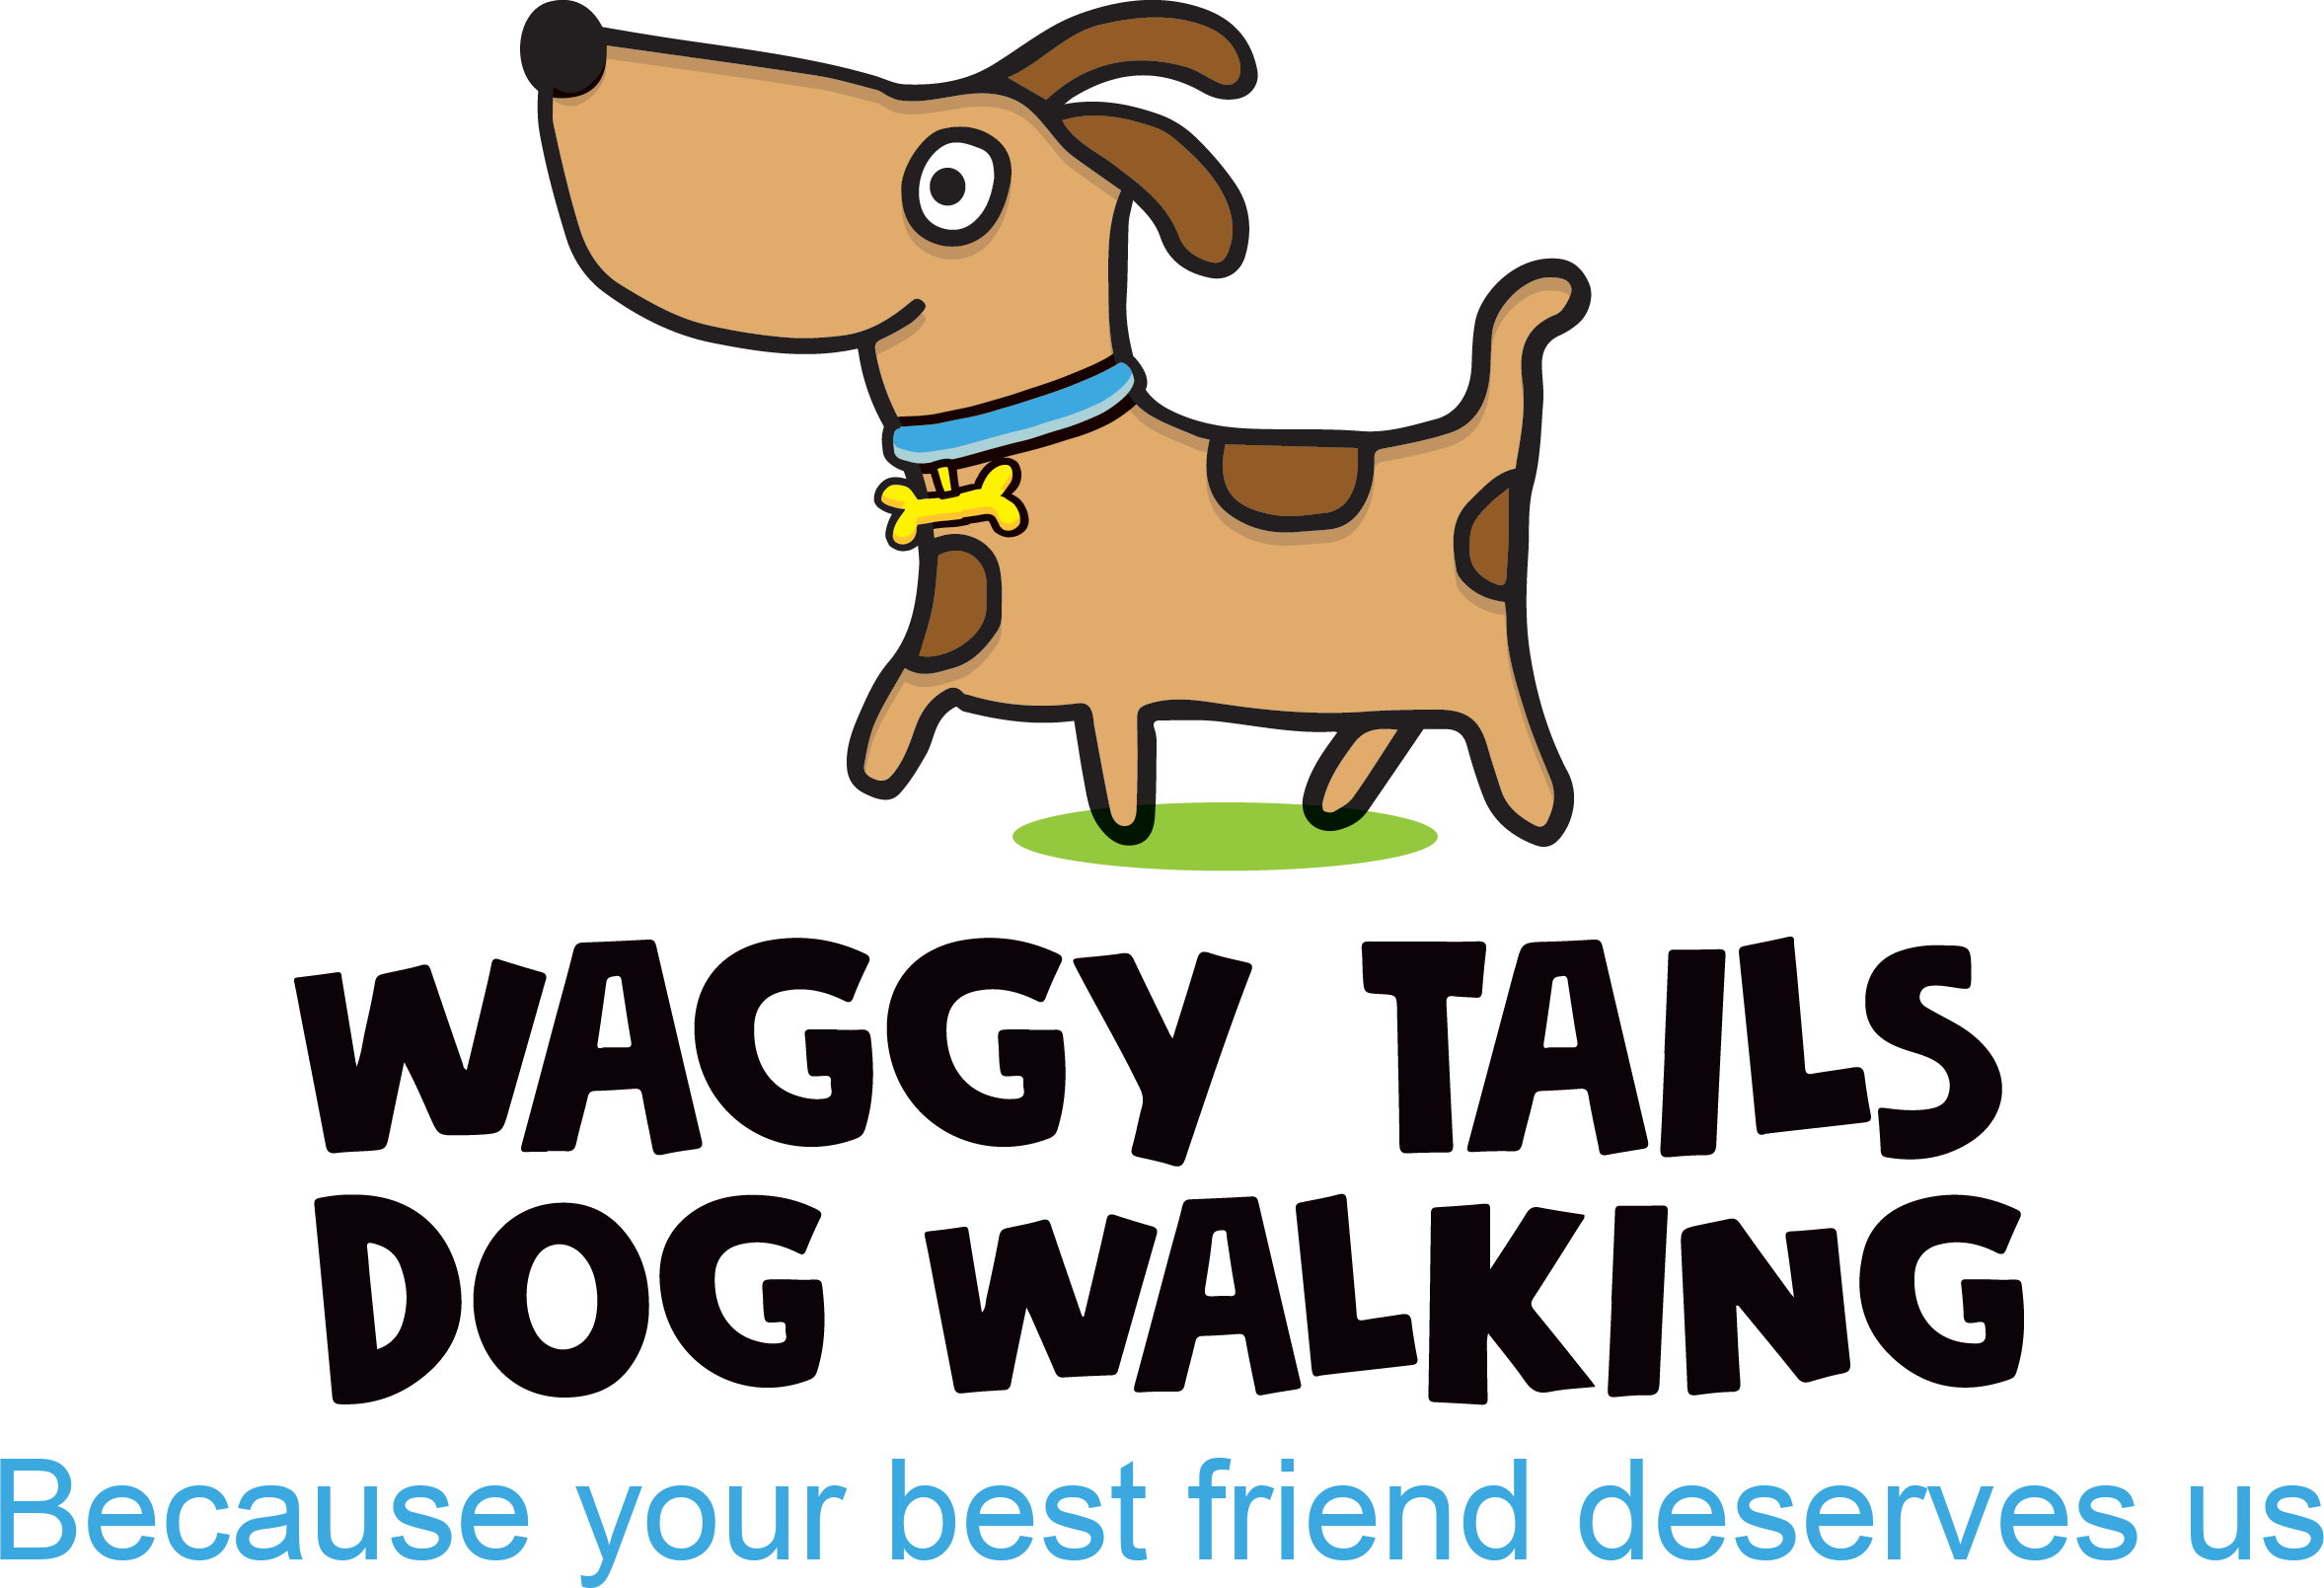 Dog walker in Dorchester. A happy cartoon dog walking over a sign that says waggy tails dog walking